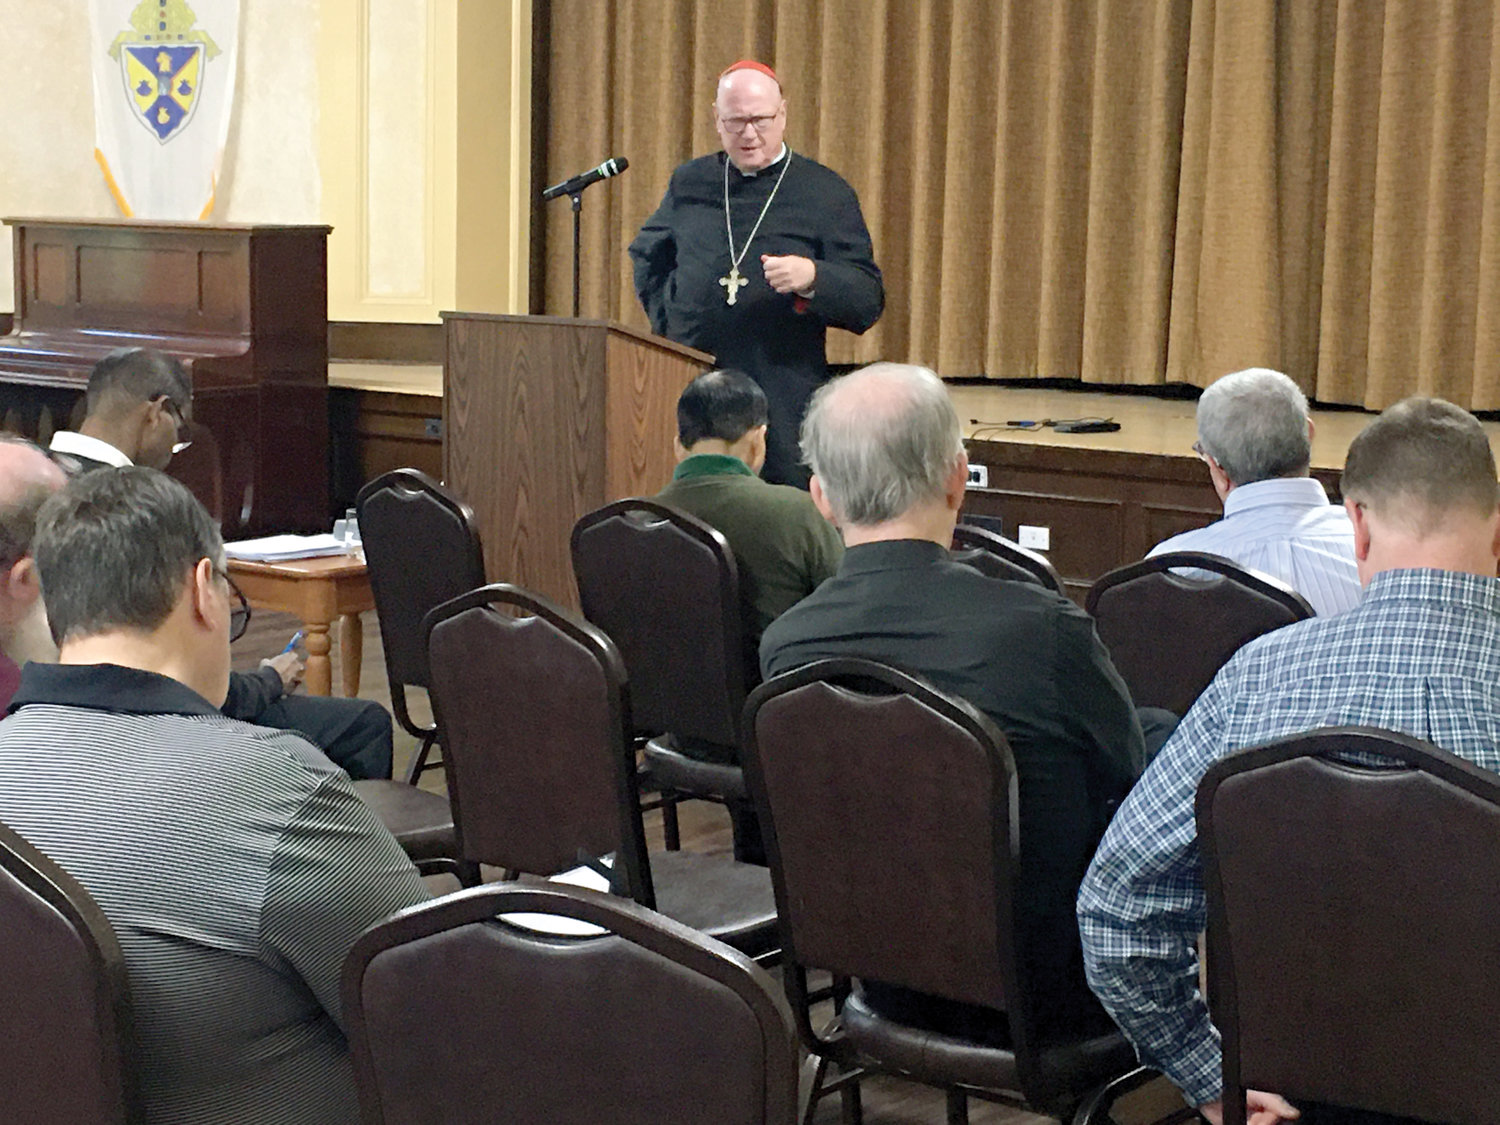 The cardinal delivers his morning conference that day on Jesus’ call to St. Peter to “Cast out to the deep!” (Lk 5:4-11). A total of 115 priests attended the Oct. 4-8 retreat led by Cardinal Dolan.